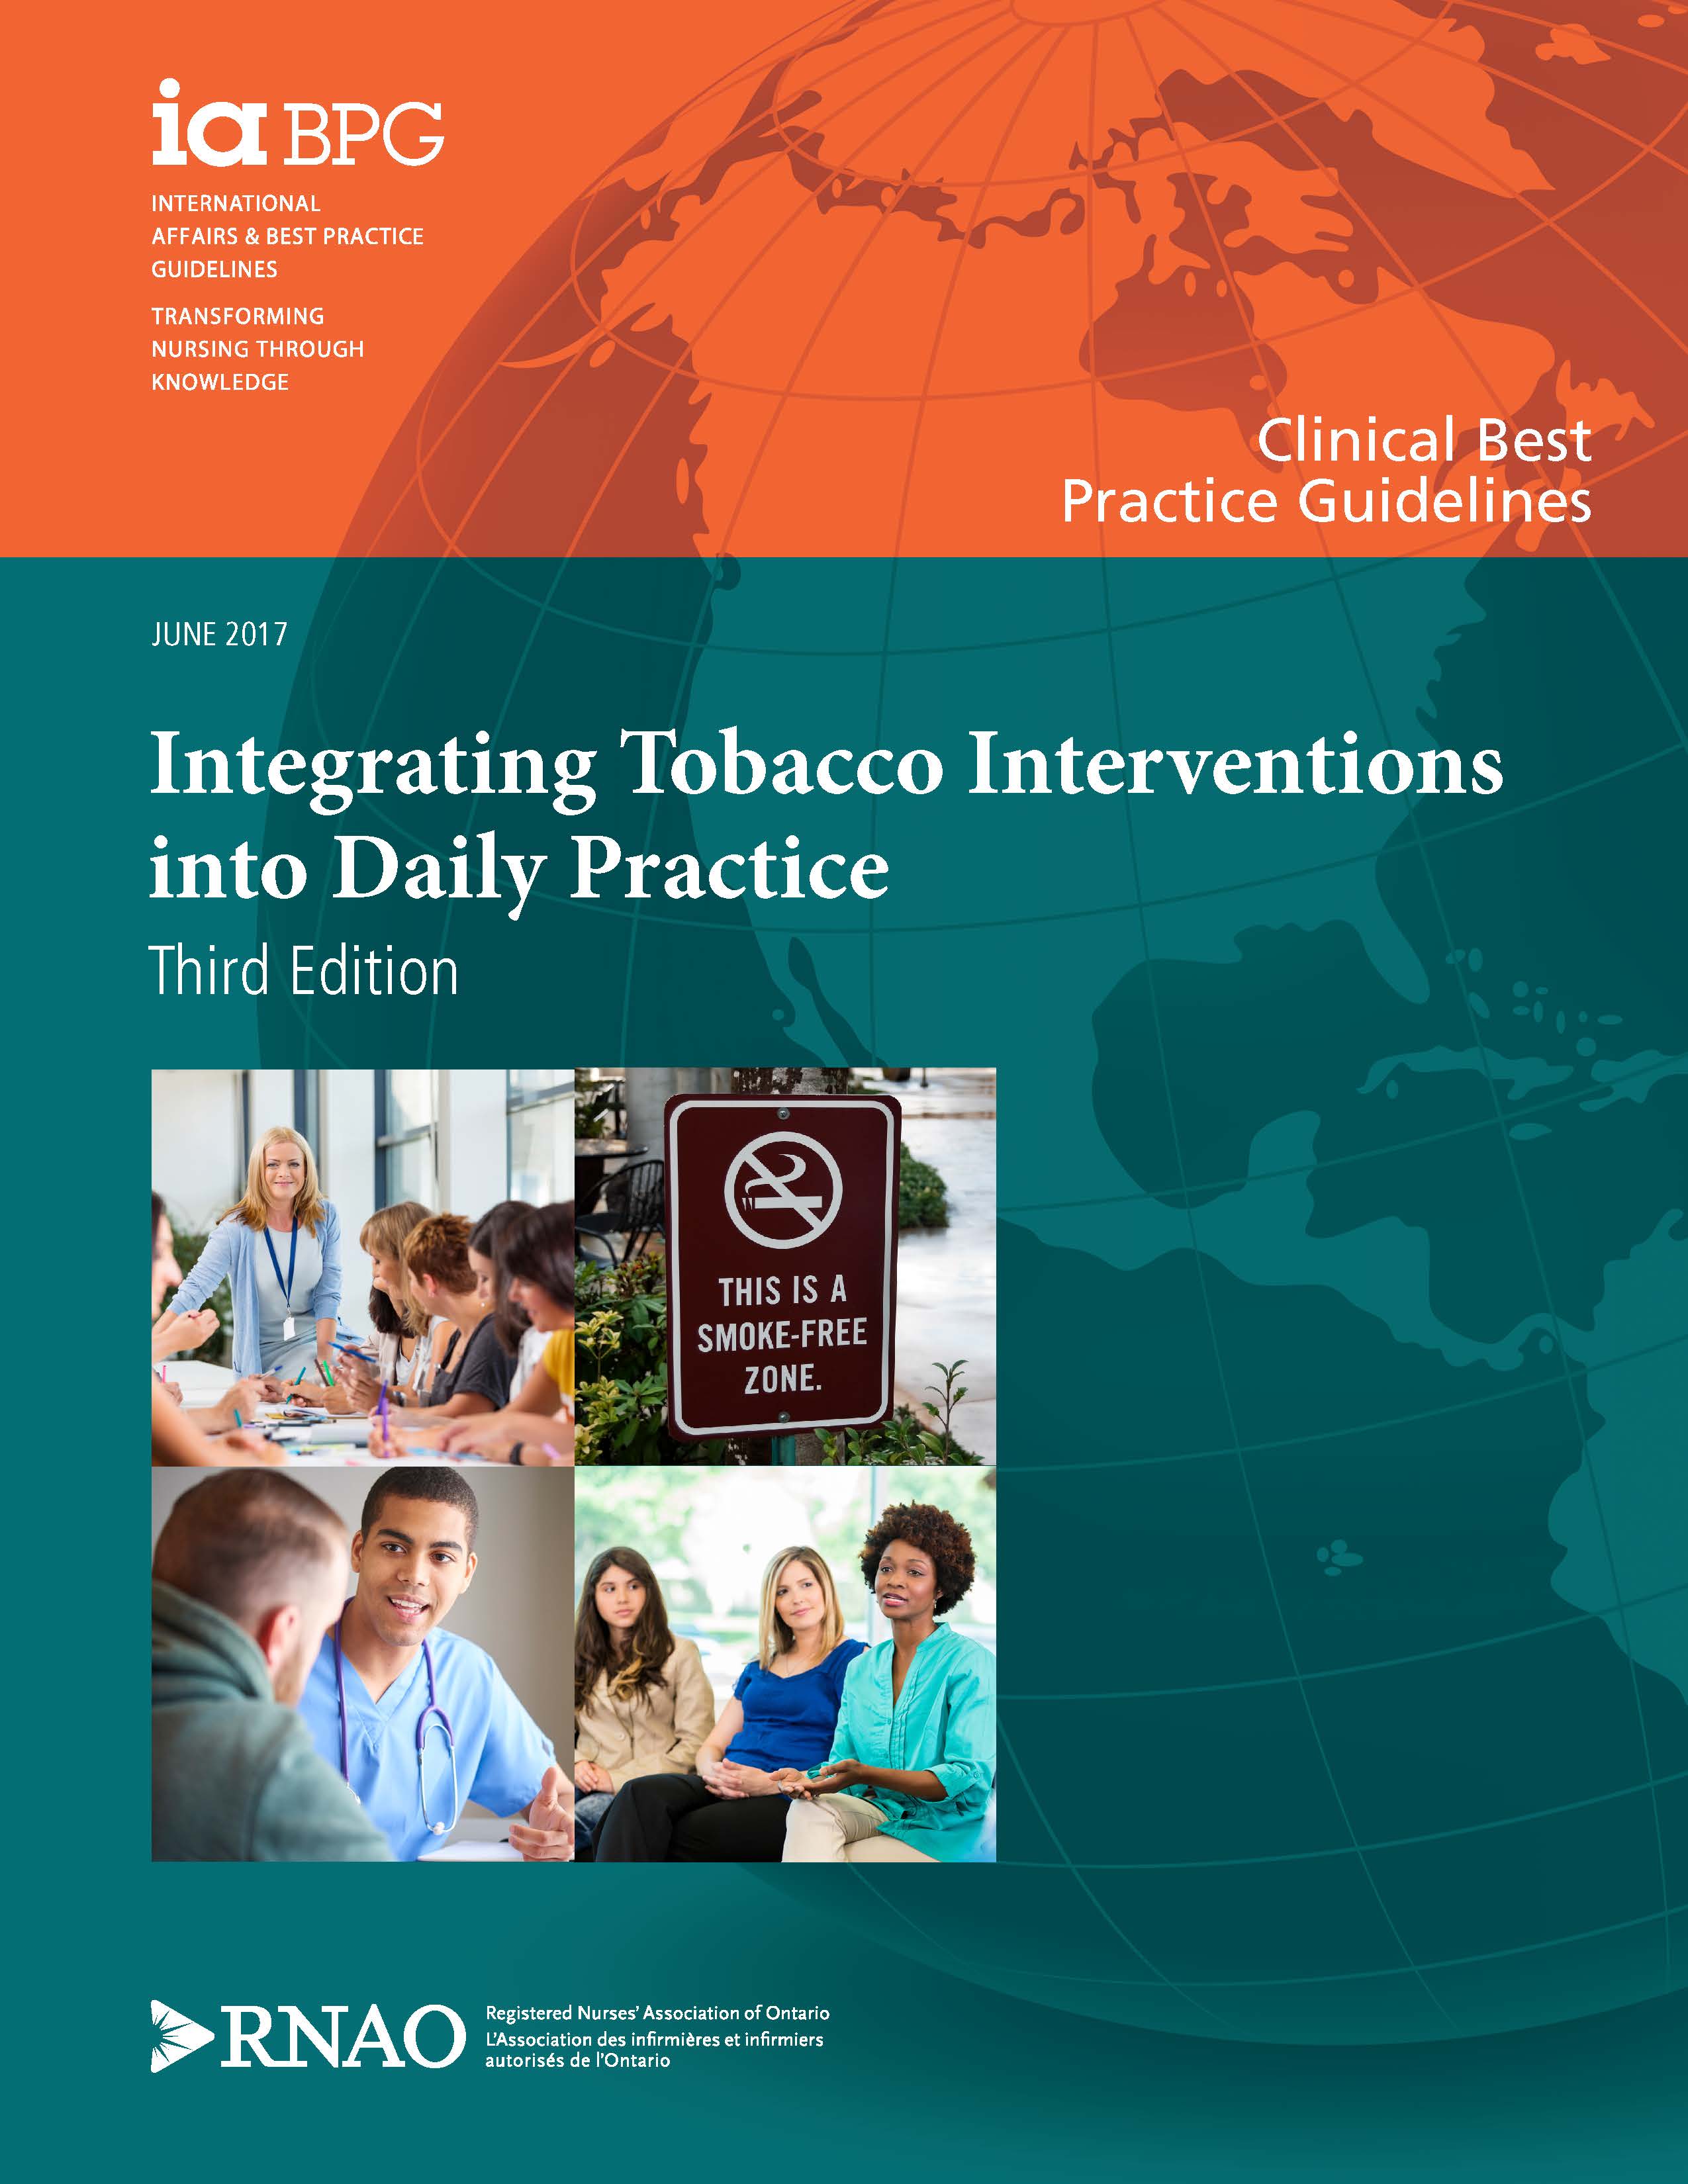 Integrating Tobacco Interventions into Daily Practice